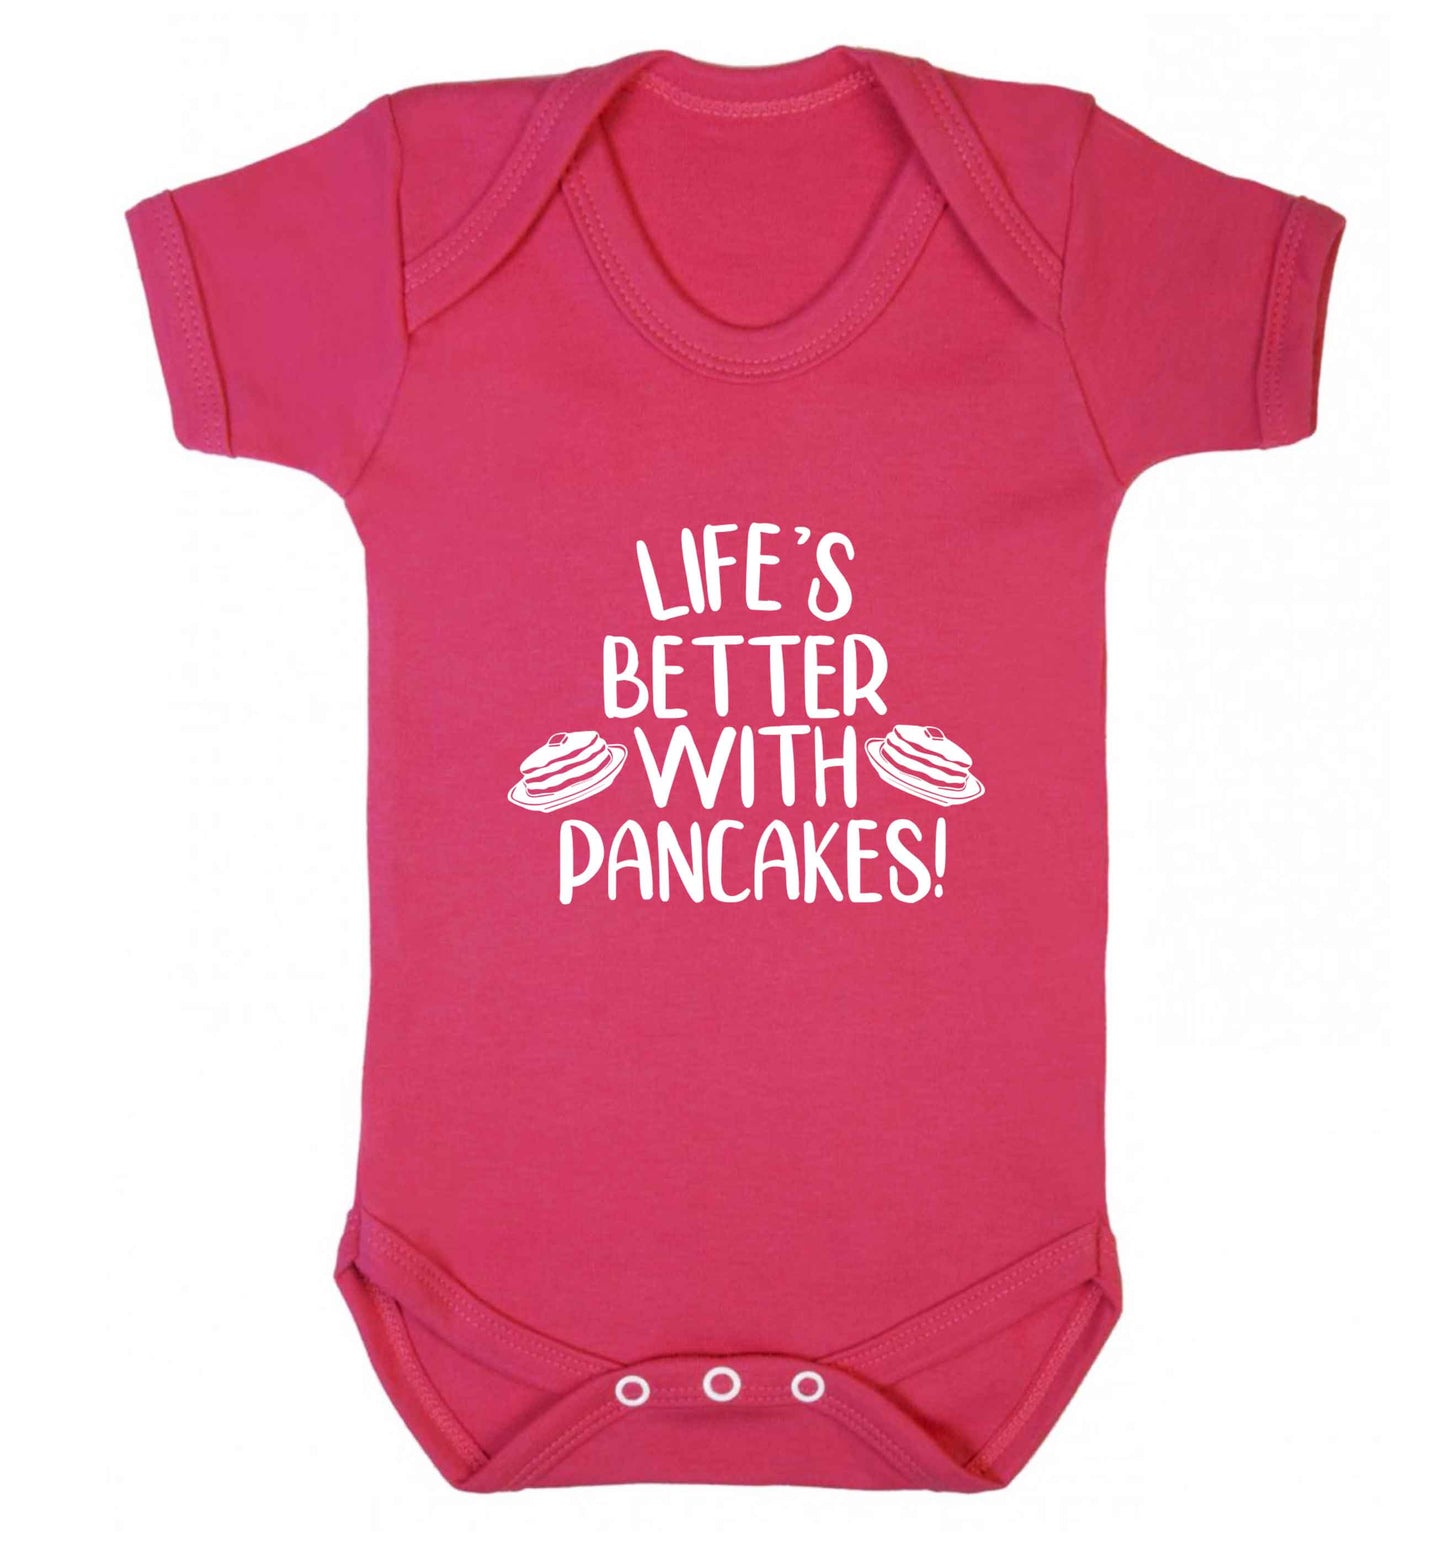 Life's better with pancakes baby vest dark pink 18-24 months